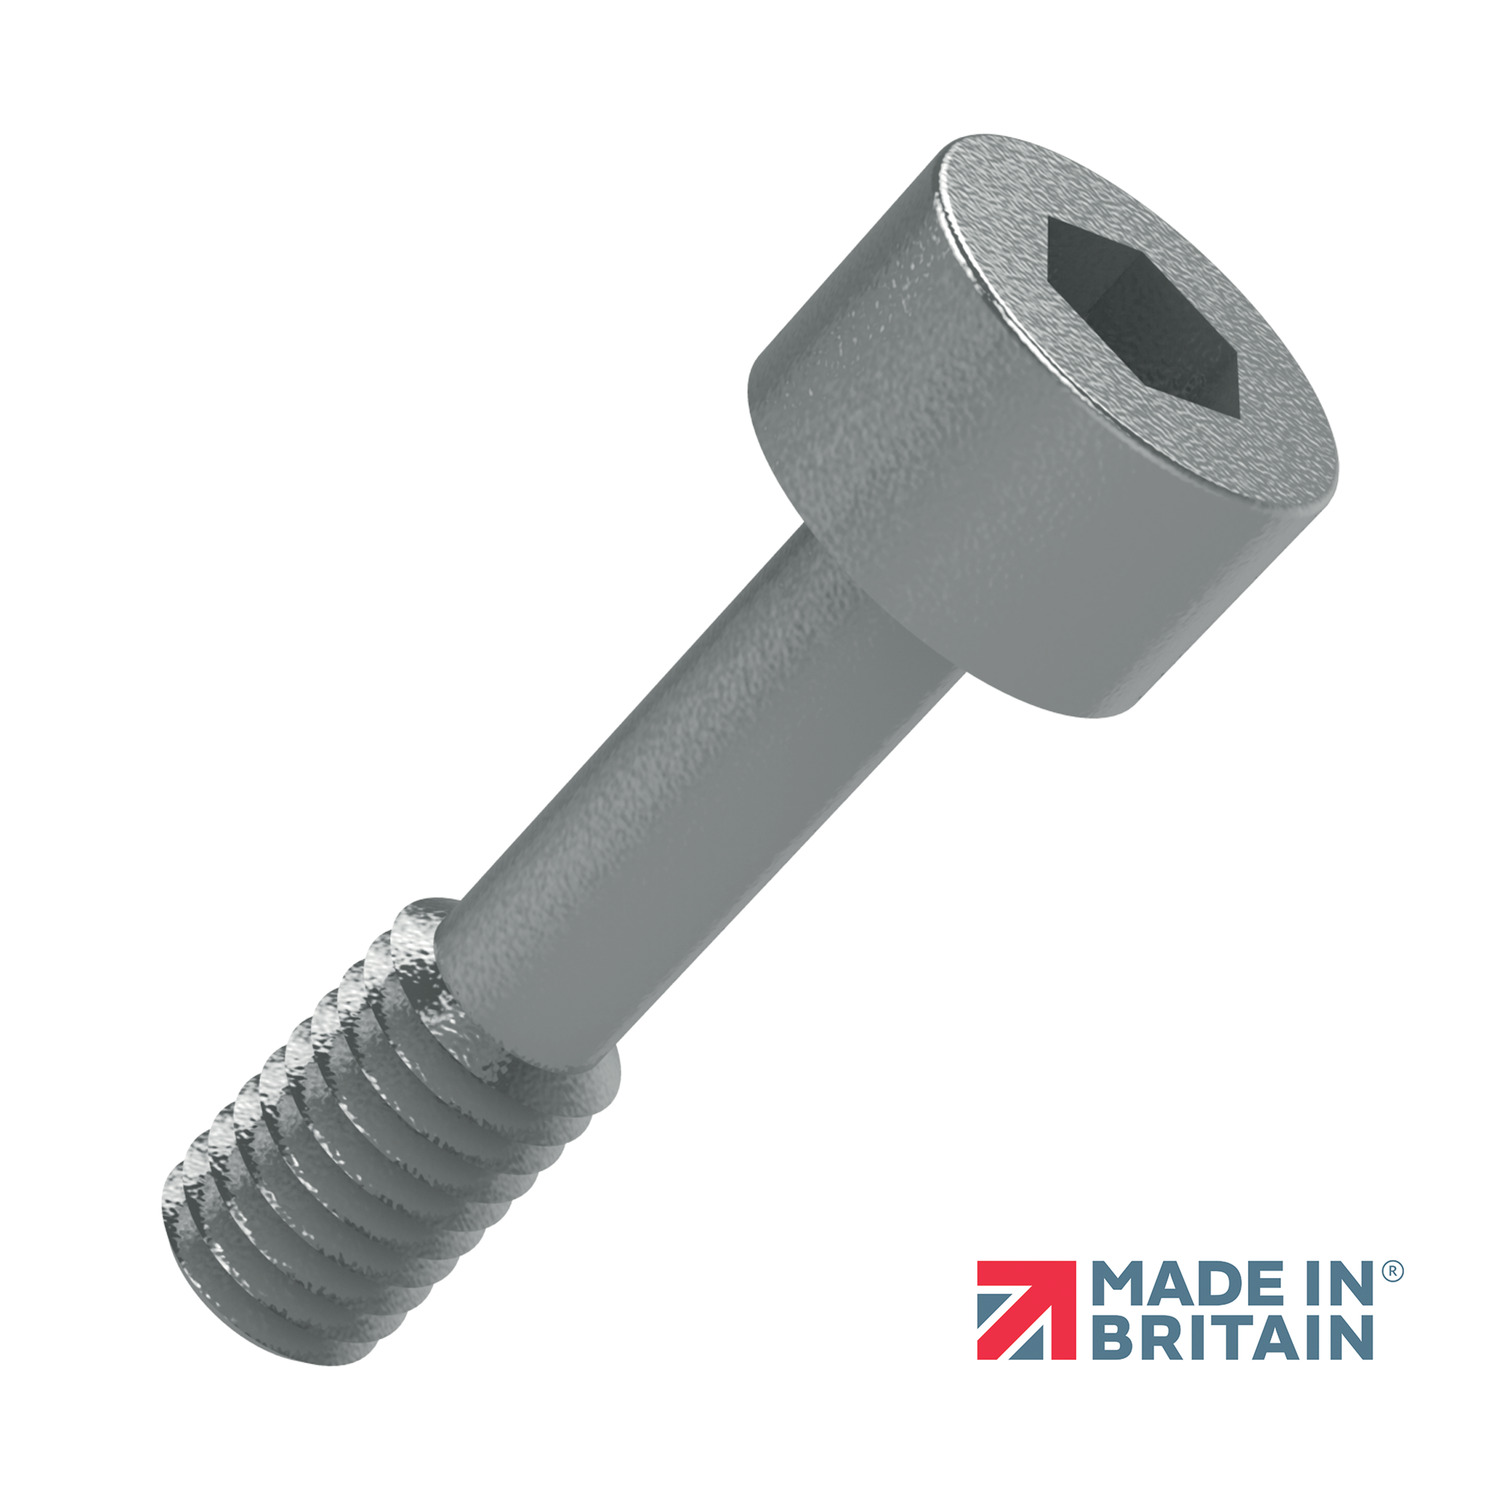 Captive Screws - Cap Head Cap head captive screw with hex drive in ASTM B348 grade 2 and grade 5 titanium. Captive screws provide added security when used as fastenings because they do not fall out of panels even when loosened. We can manufacture our entire range of captive screws and captive thumb screws in titanium.